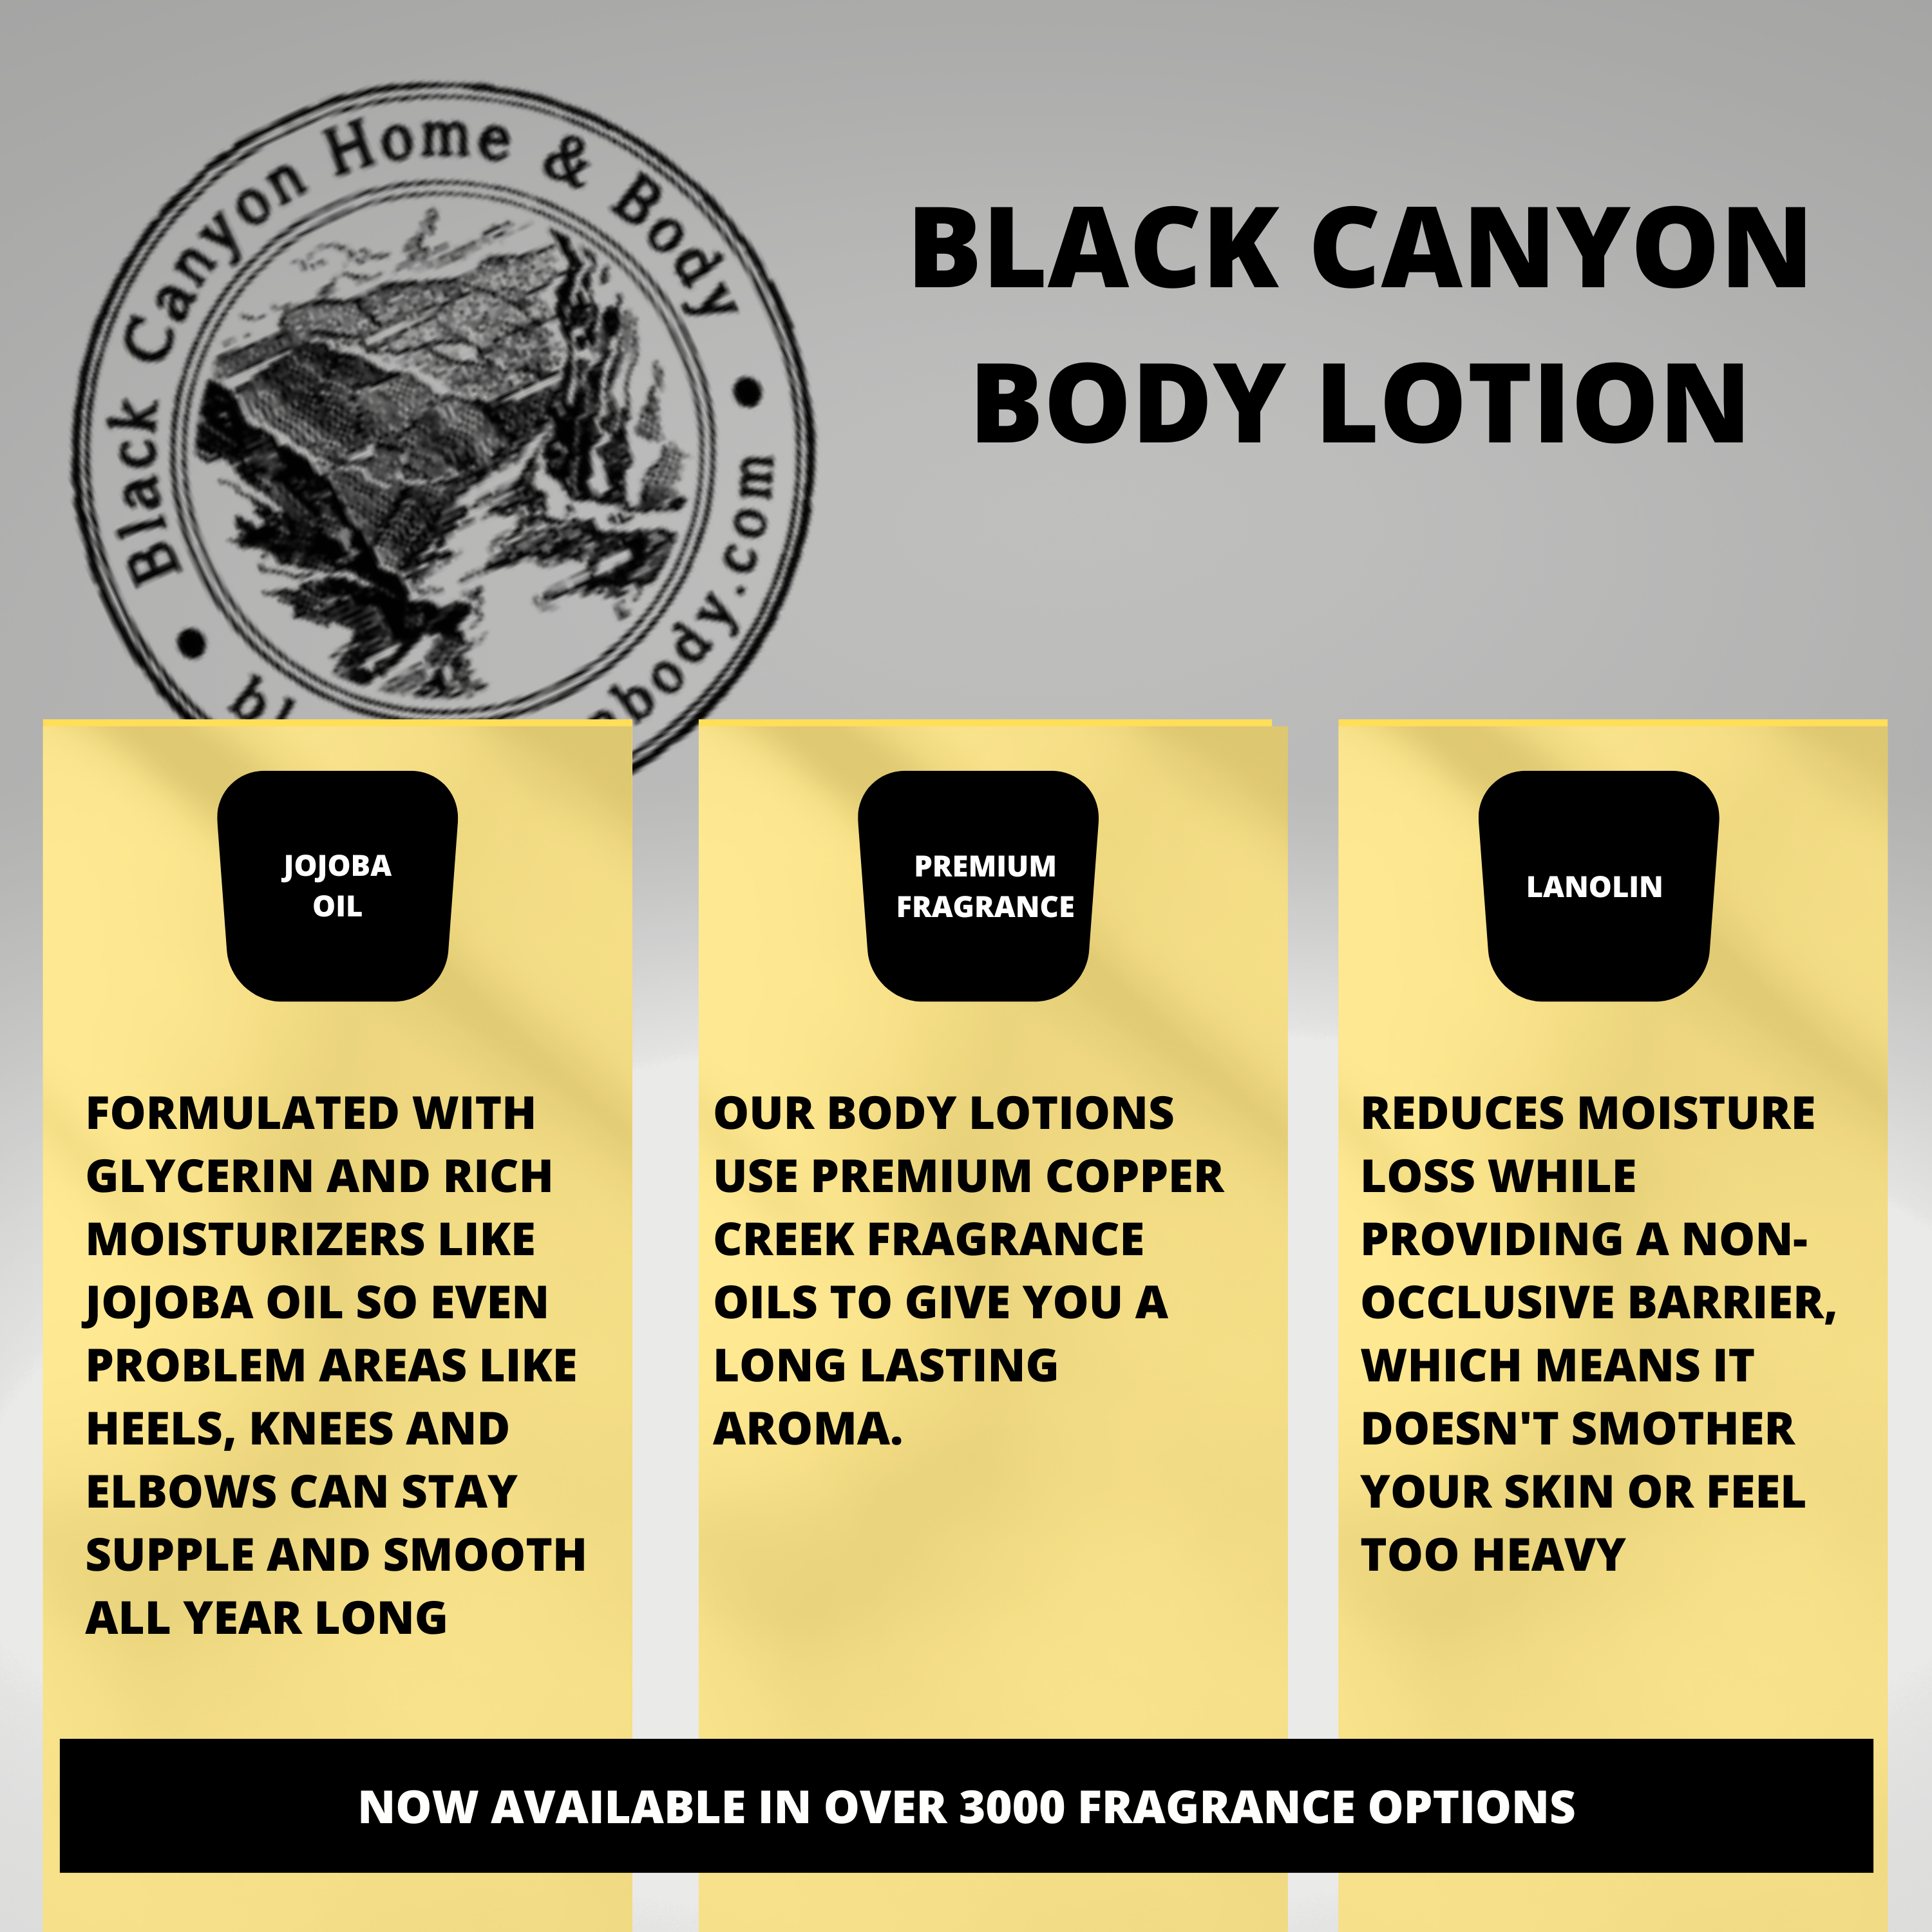 Black Canyon Black Fig & Honey Scented Luxury Body Lotion with Lanolin and Jojoba Oil